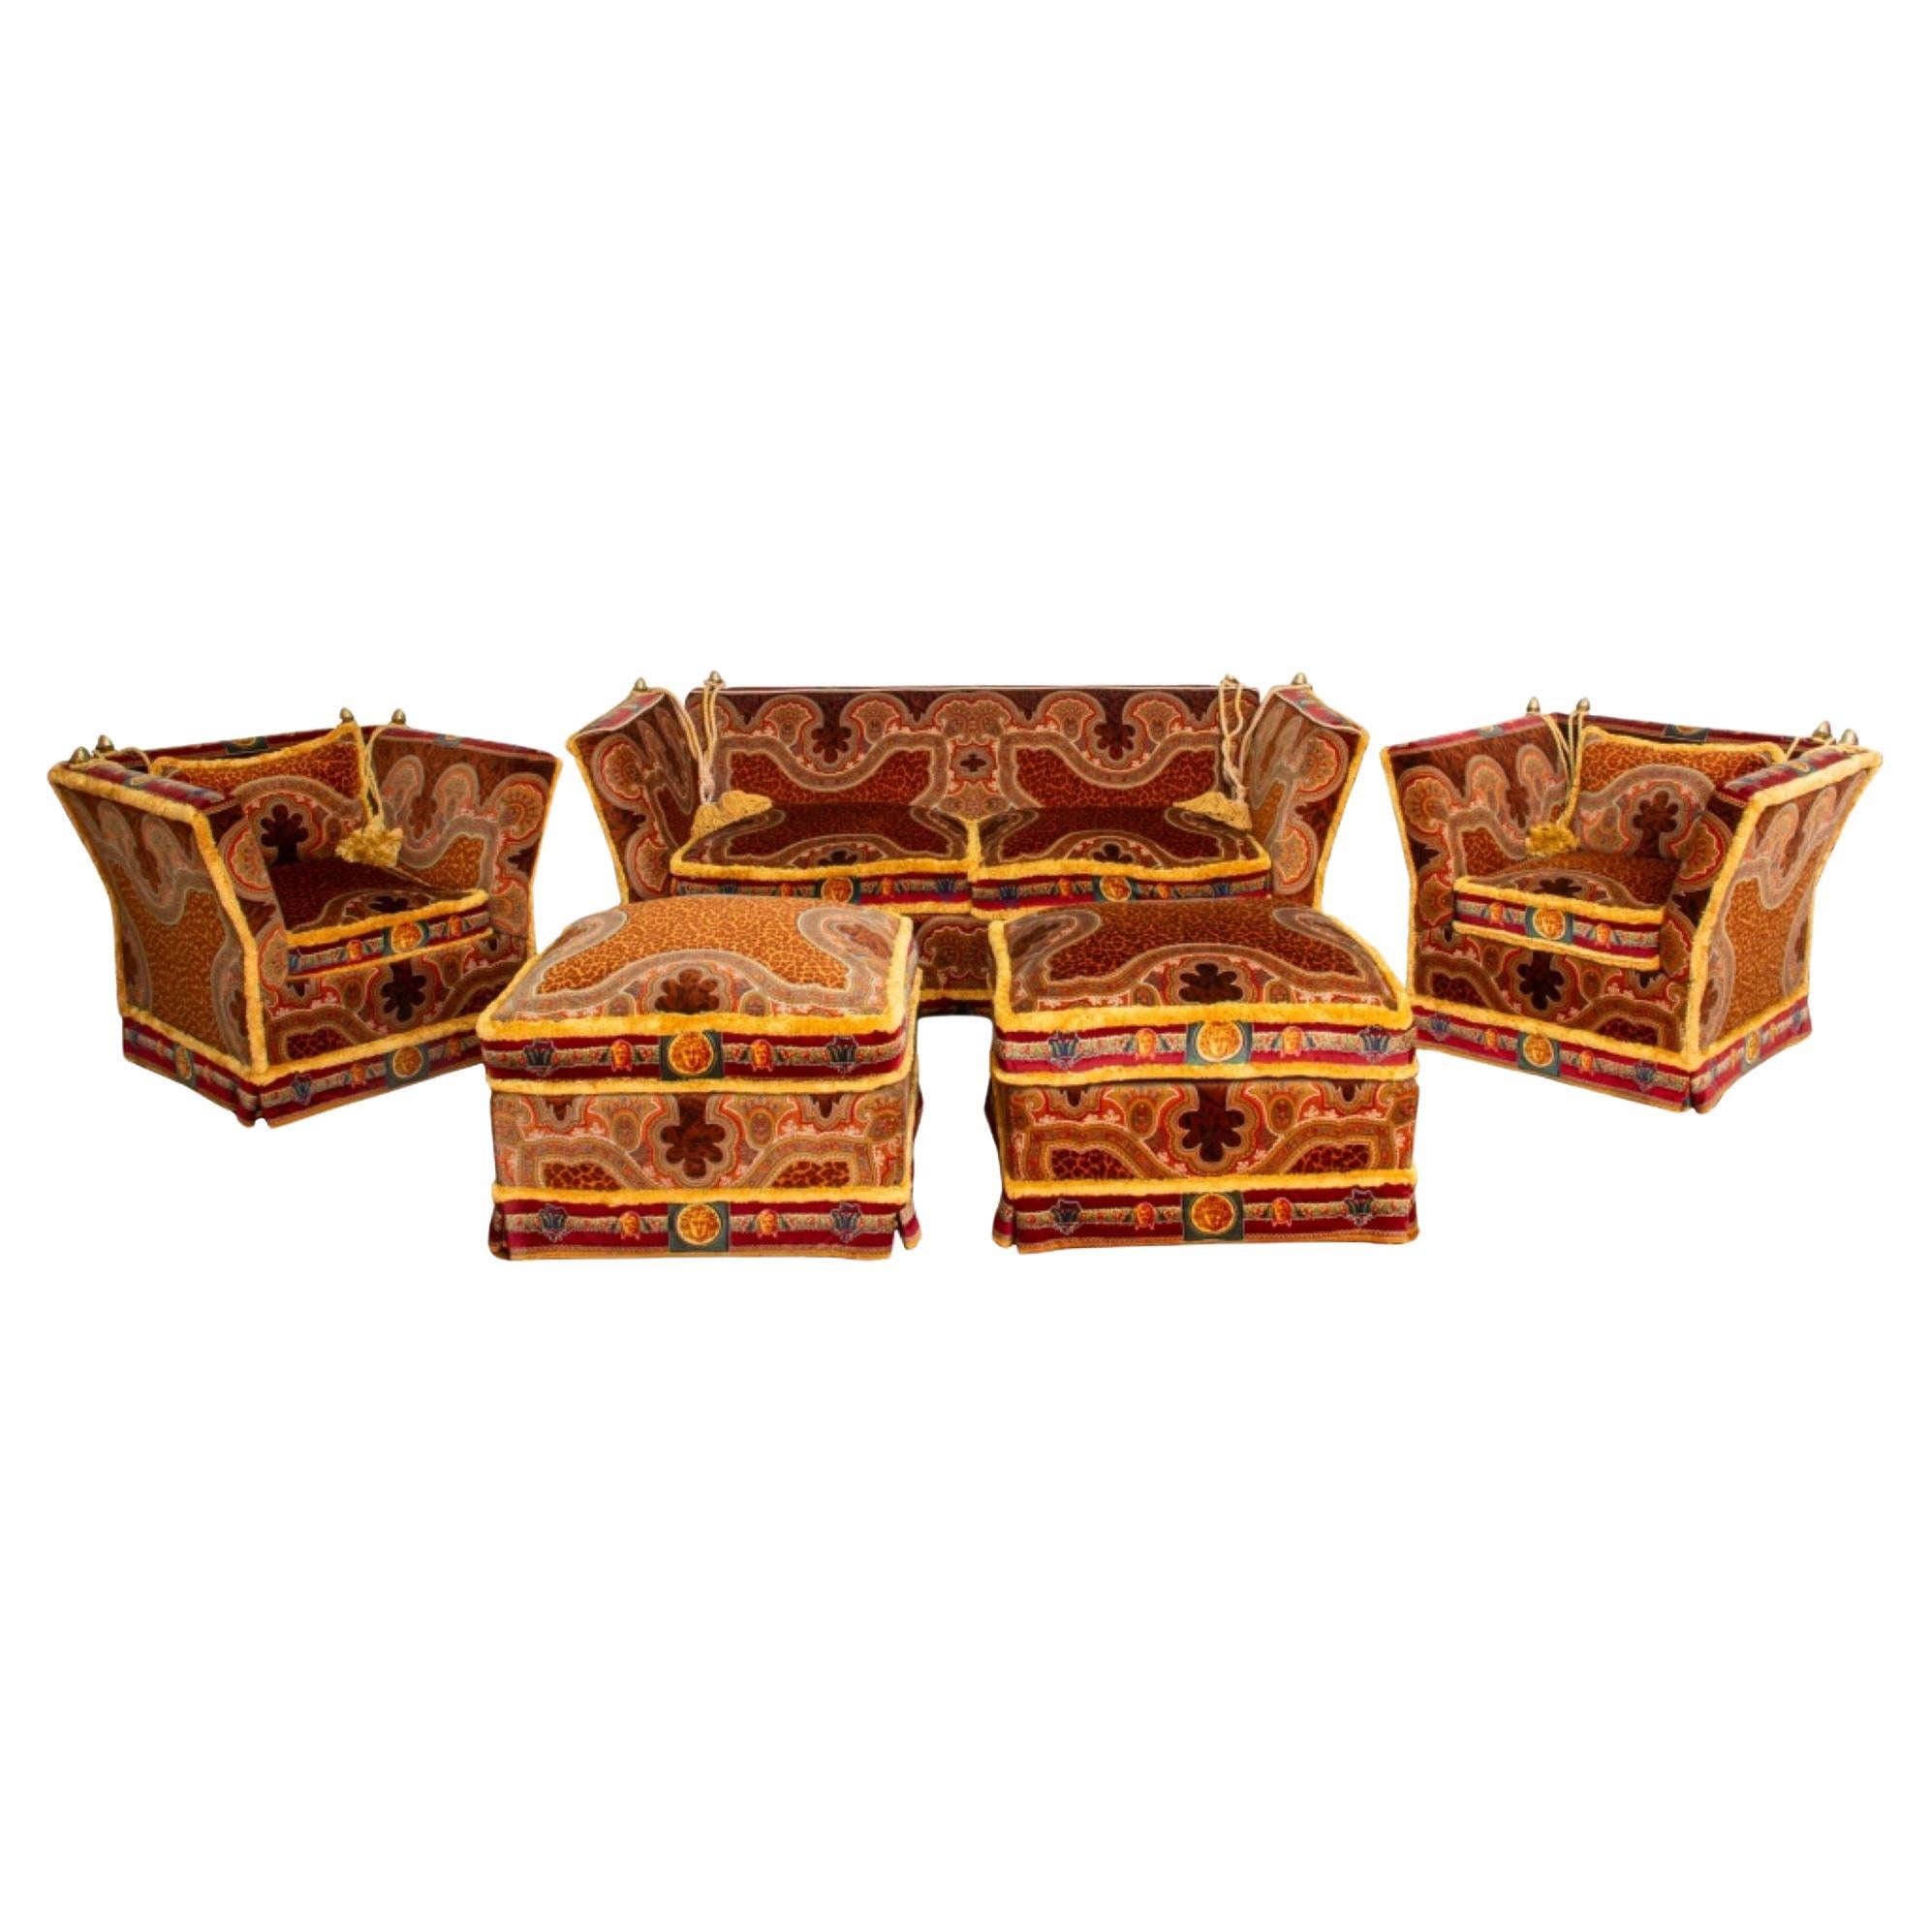 Sold at Auction: GIANNI VERSACE STYLE SOFA. RICHLY PATTERNED VELVET UPH